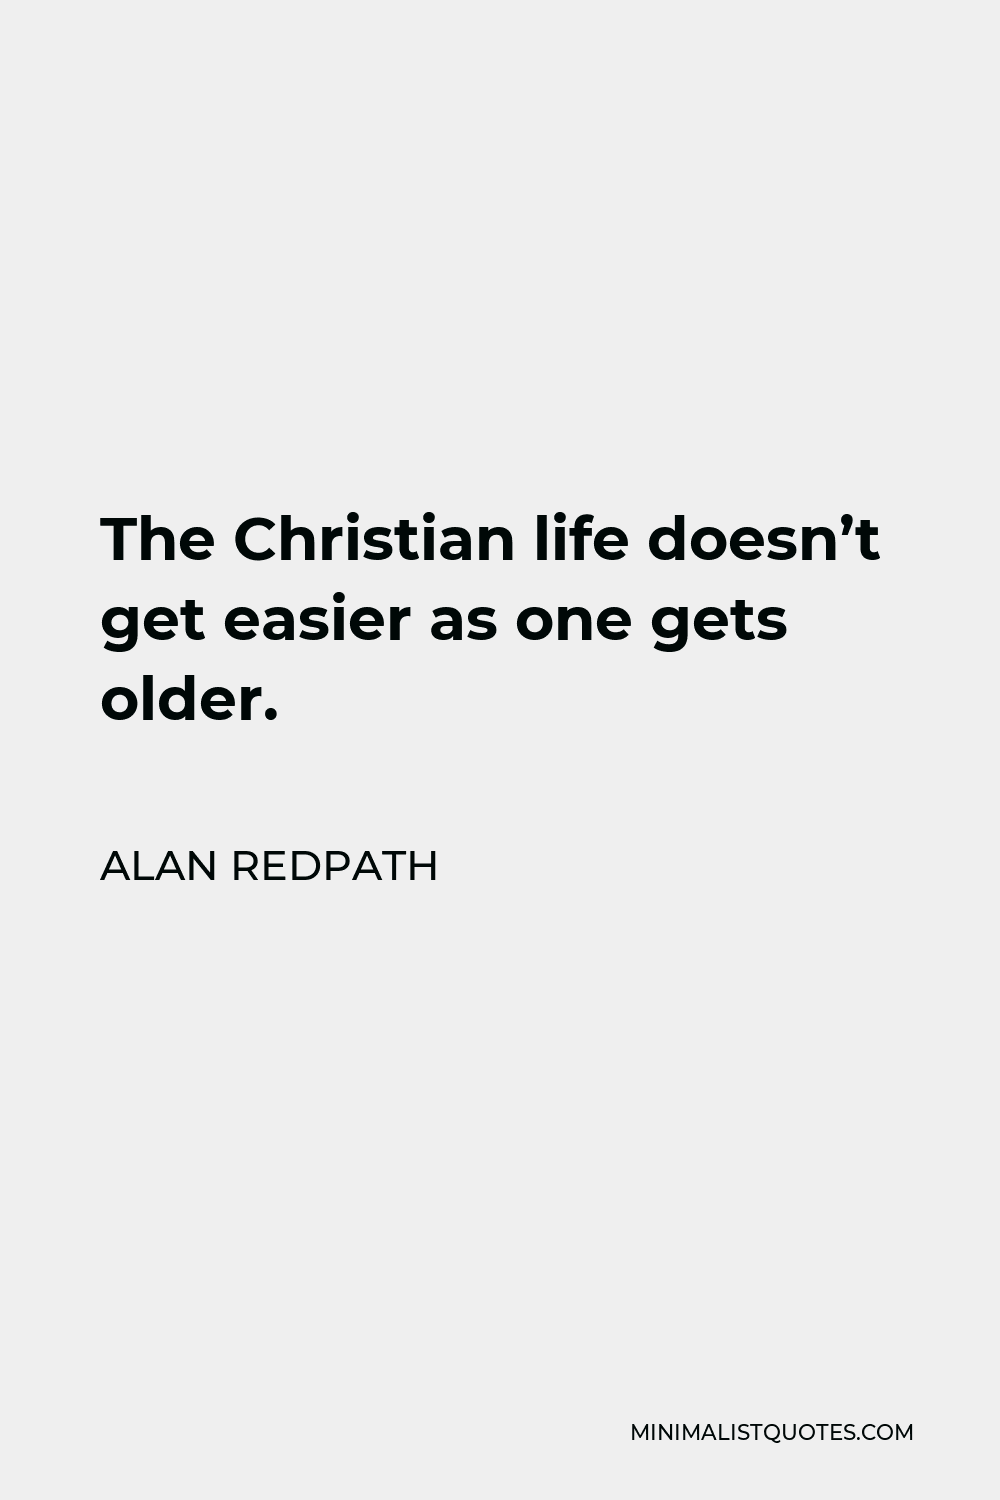 Alan Redpath Quote - The Christian life doesn’t get easier as one gets older.